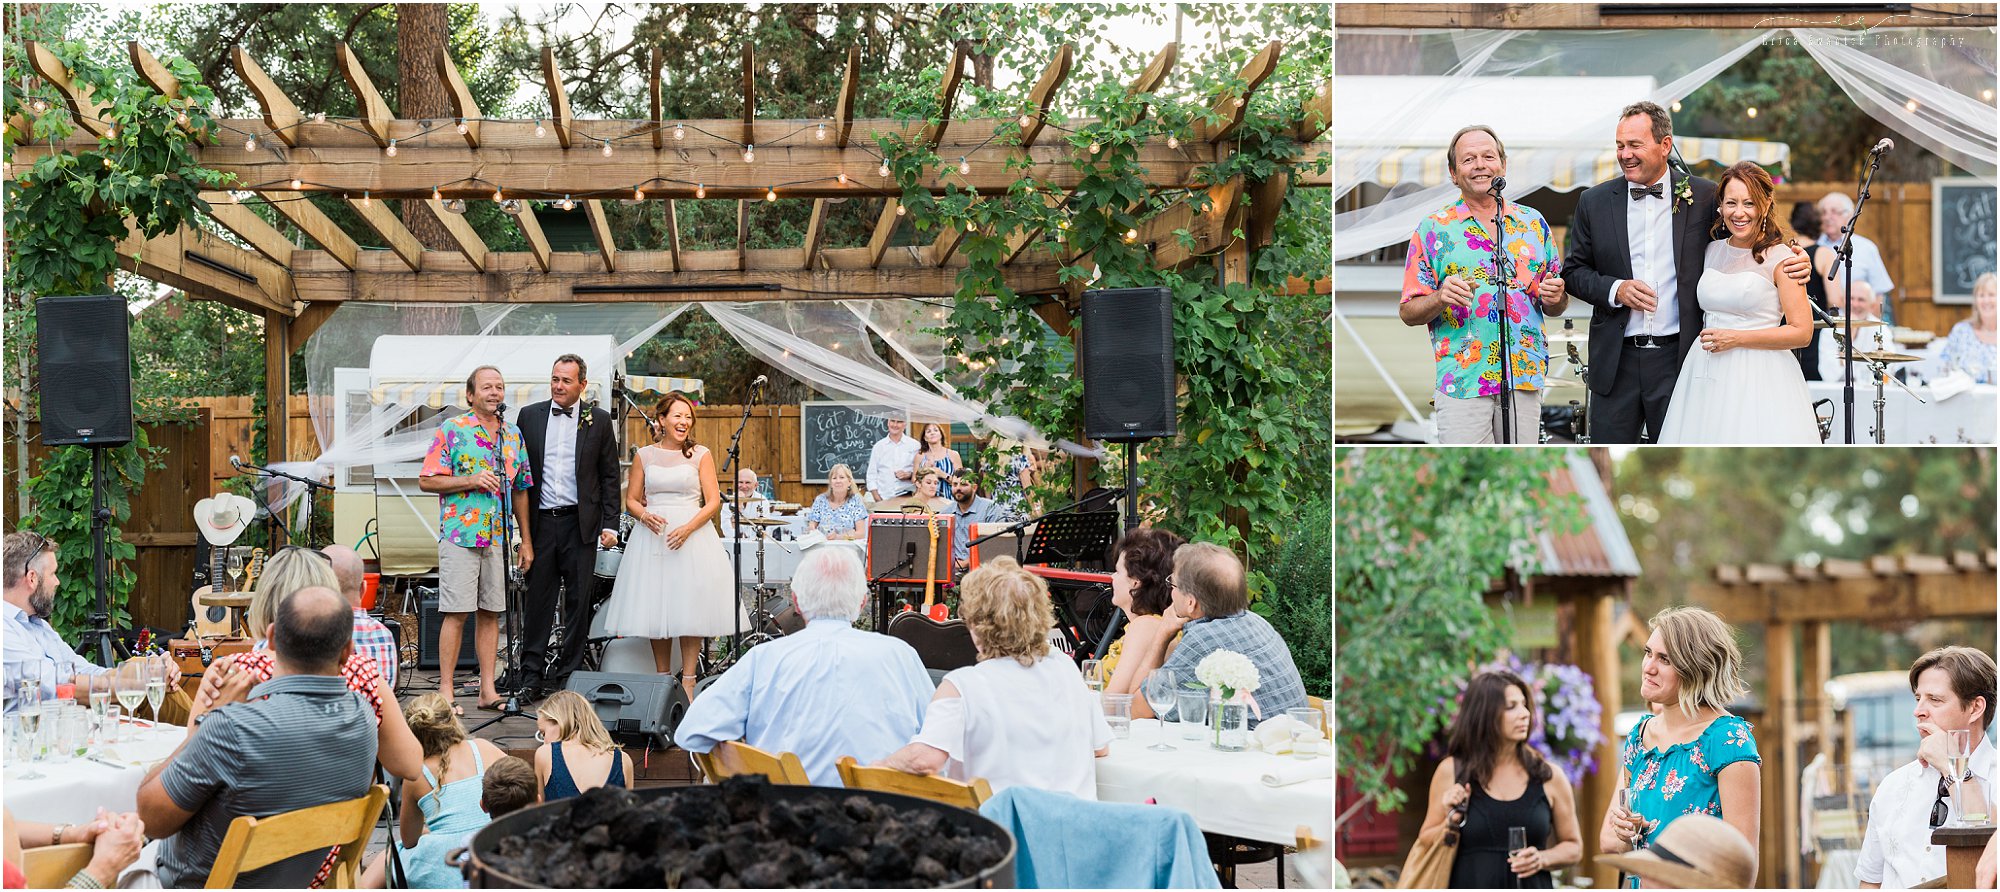 A beautiful wooden stage in the courtyard at The Open Door is the perfect place for your wedding toasts at a garden art gallery wine bar wedding. | Erica Swantek Photography